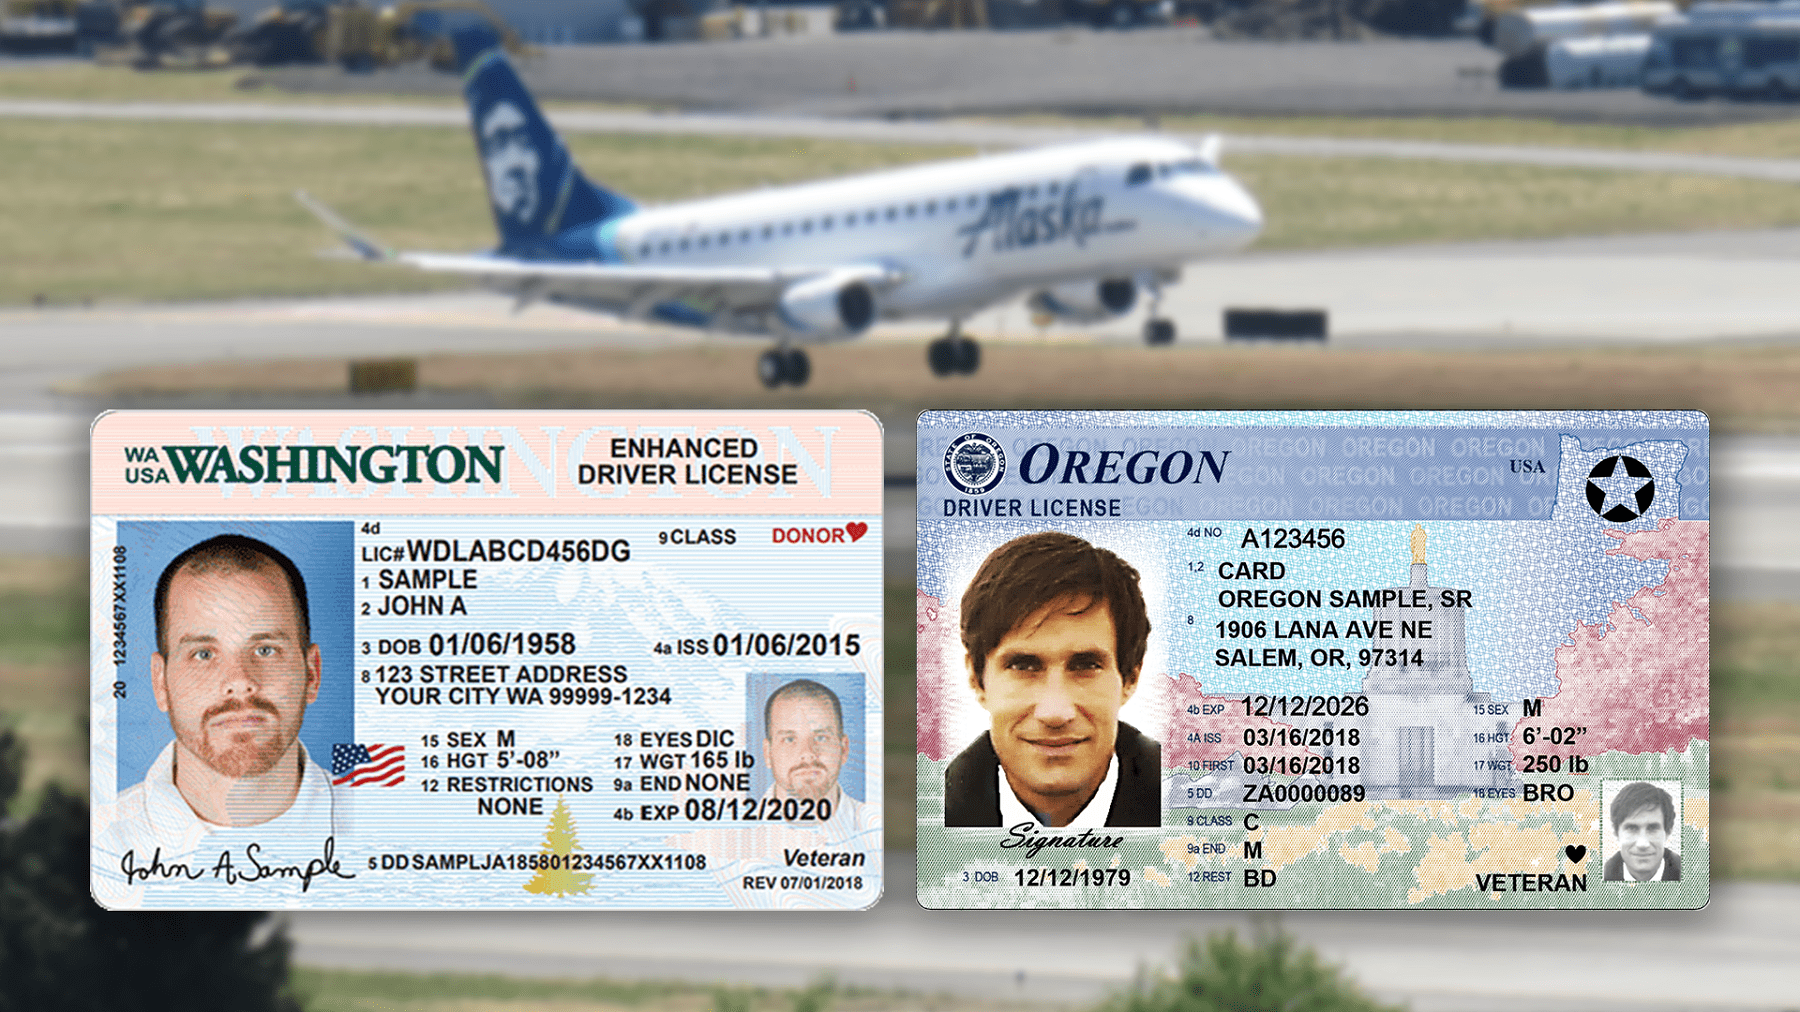 driver's license for air travel